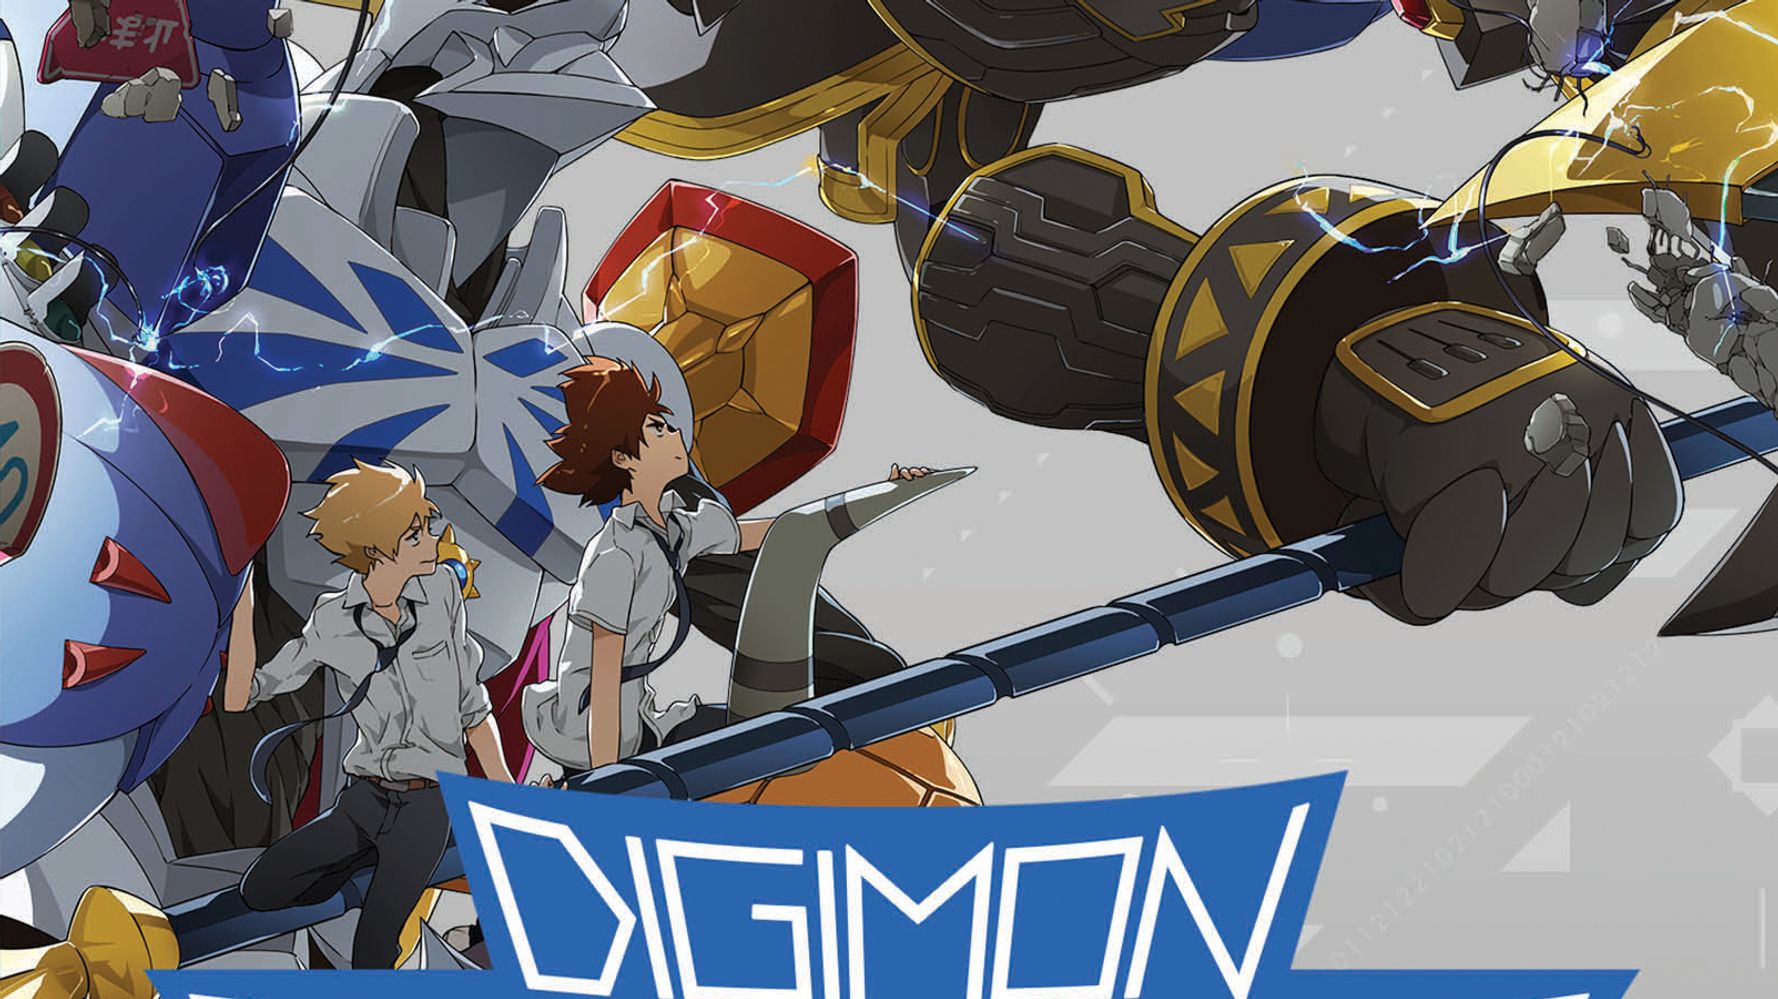 Fan unhappy with new Digimon tri. art starts petition for redesign